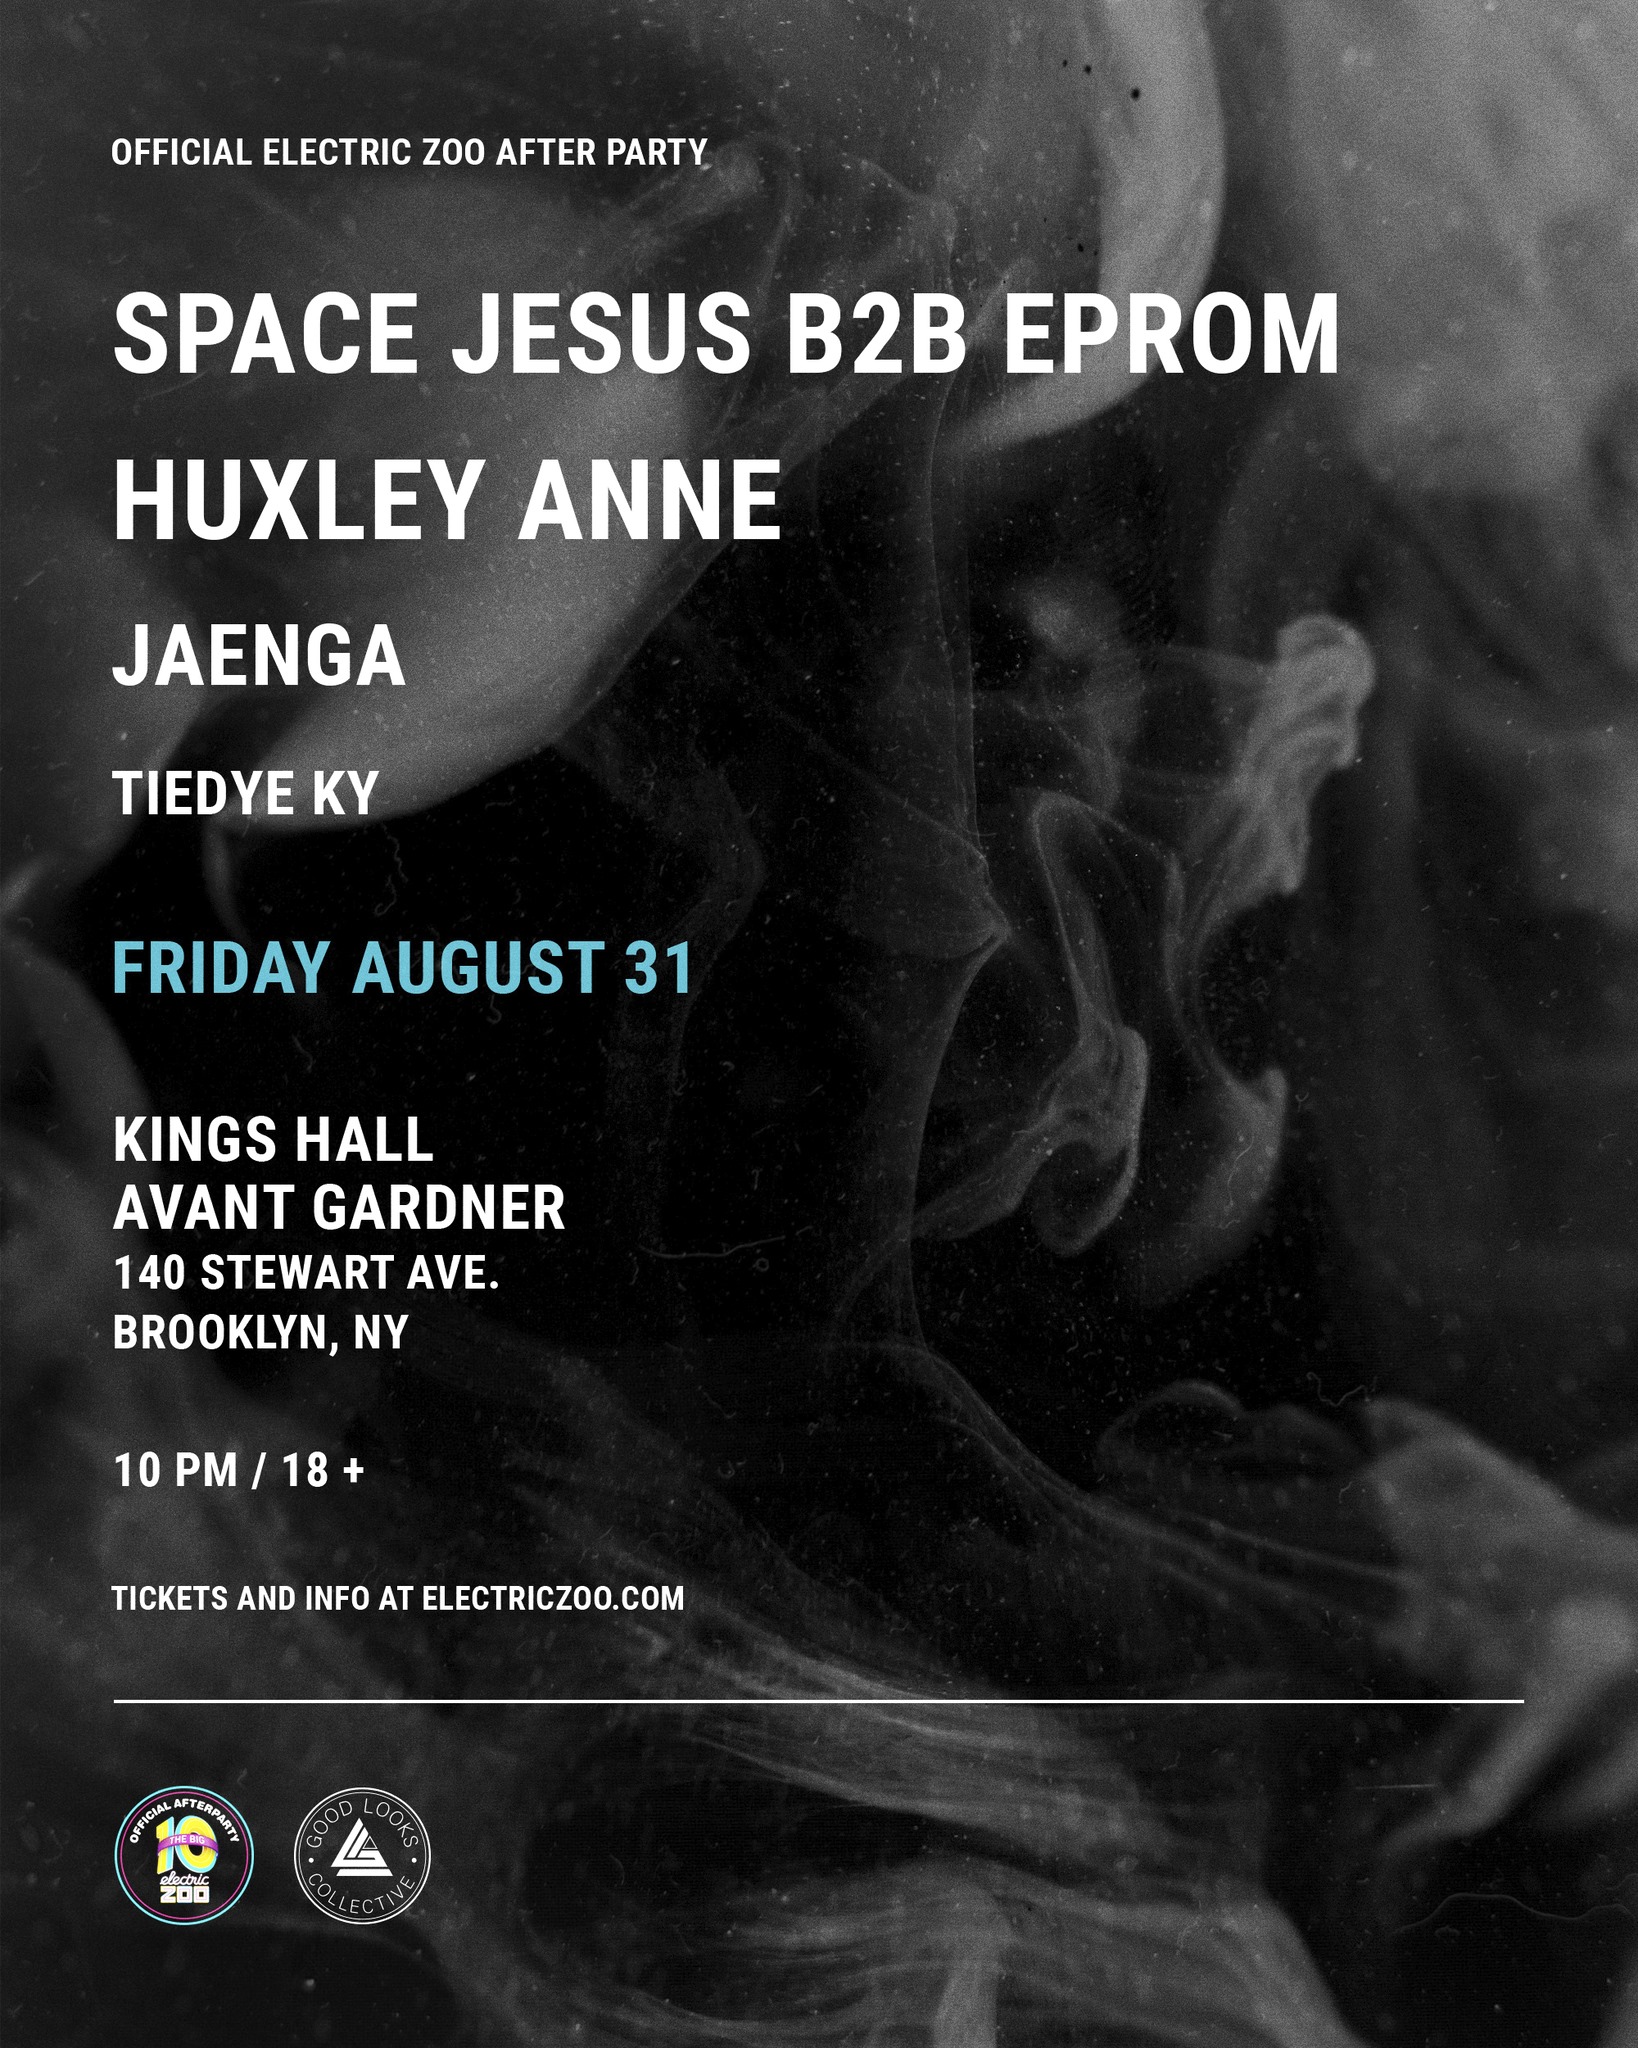 Space Jesus b2b EPROM this Friday in Brooklyn | Music Ecology